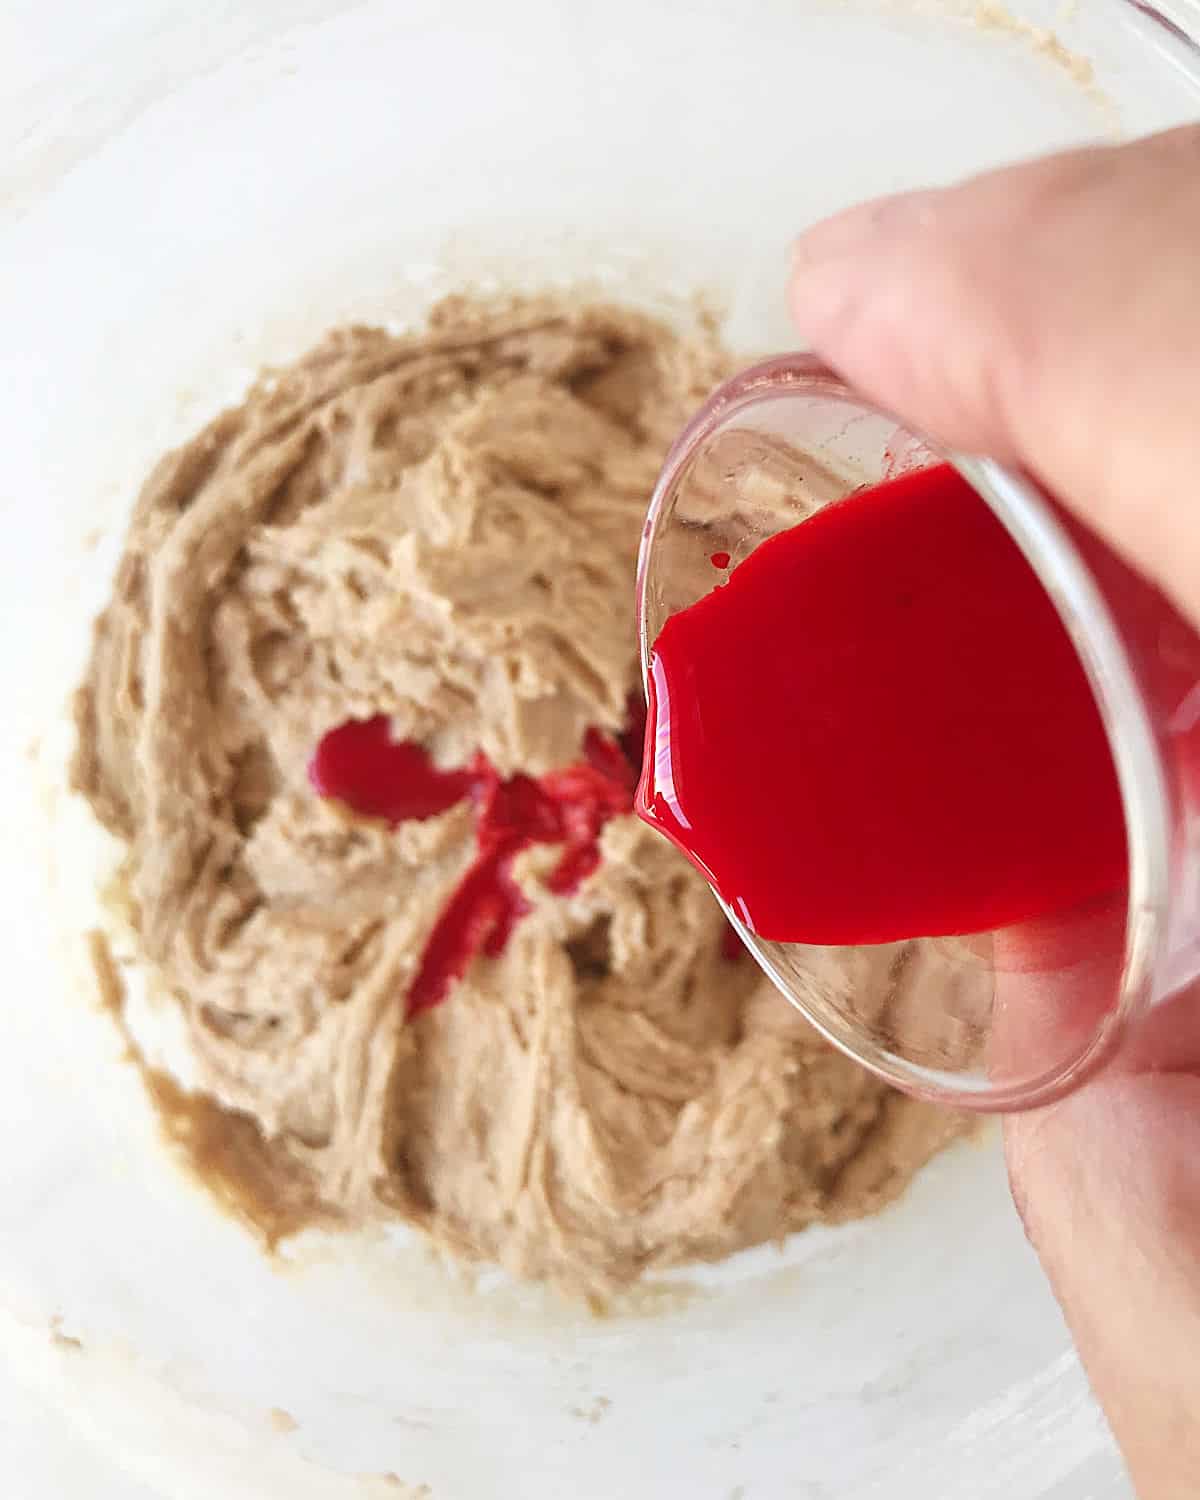 Adding red food coloring to cake batter in a glass bowl.